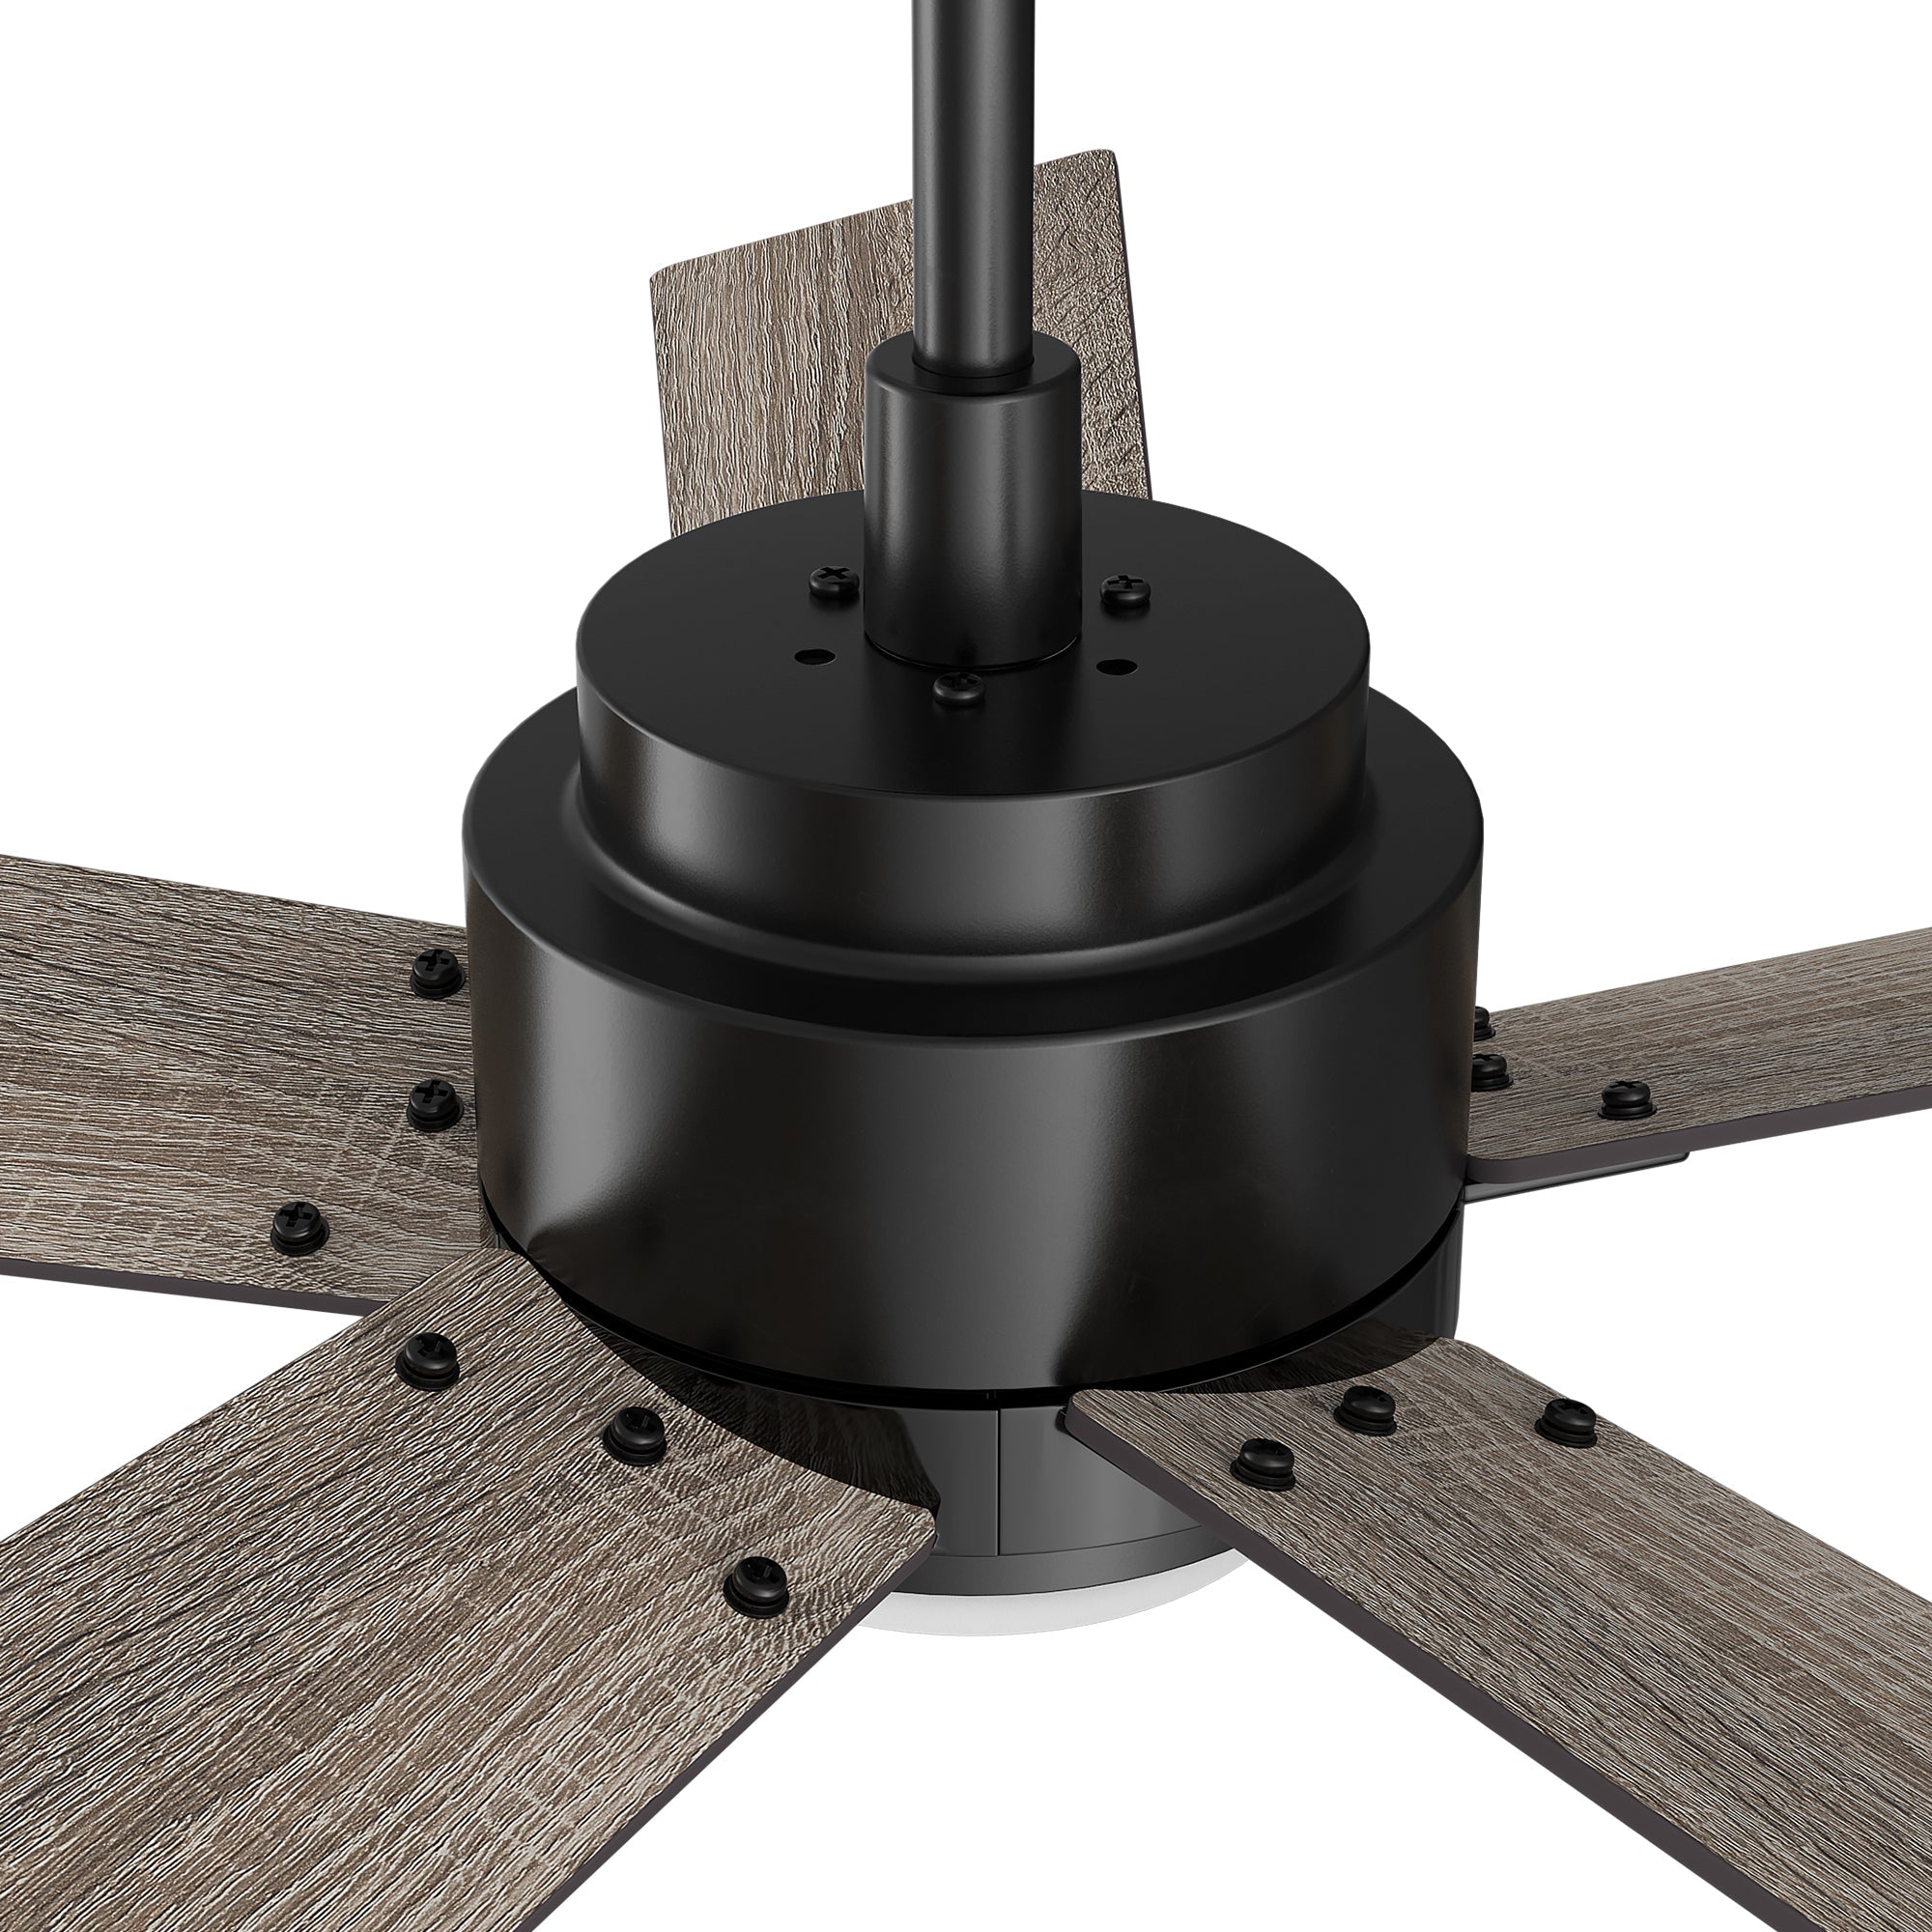 This Aspen 60&#39;&#39; smart ceiling fan keeps your space cool, bright, and stylish. It is a soft modern masterpiece perfect for your large indoor living spaces. This Wifi smart ceiling fan is a simplicity designing with Black finish, use elegant Plywood blades and has an integrated 3999K LED daylight. The fan features Remote control, Wi-Fi apps, Siri Shortcut and Voice control technology (compatible with Amazon Alexa and Google Home Assistant ) to set fan preferences. 